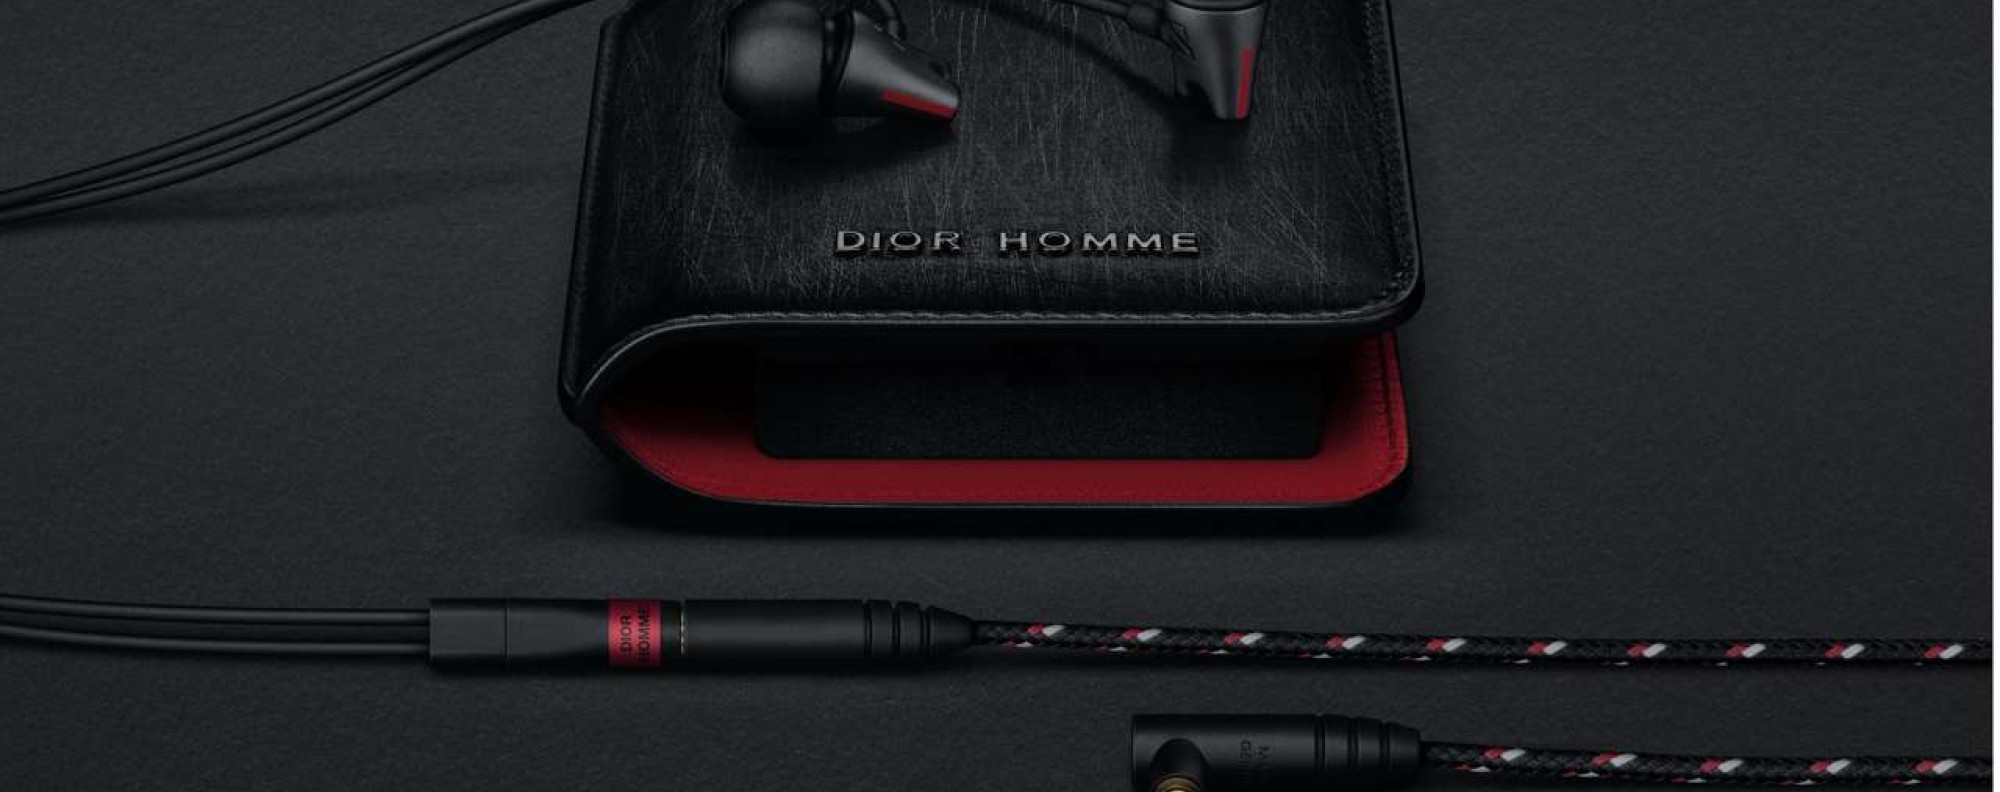 LIMITED EDITION* Dior Homme x Sennheiser PXC 550 Wireless headphones  w/backpack